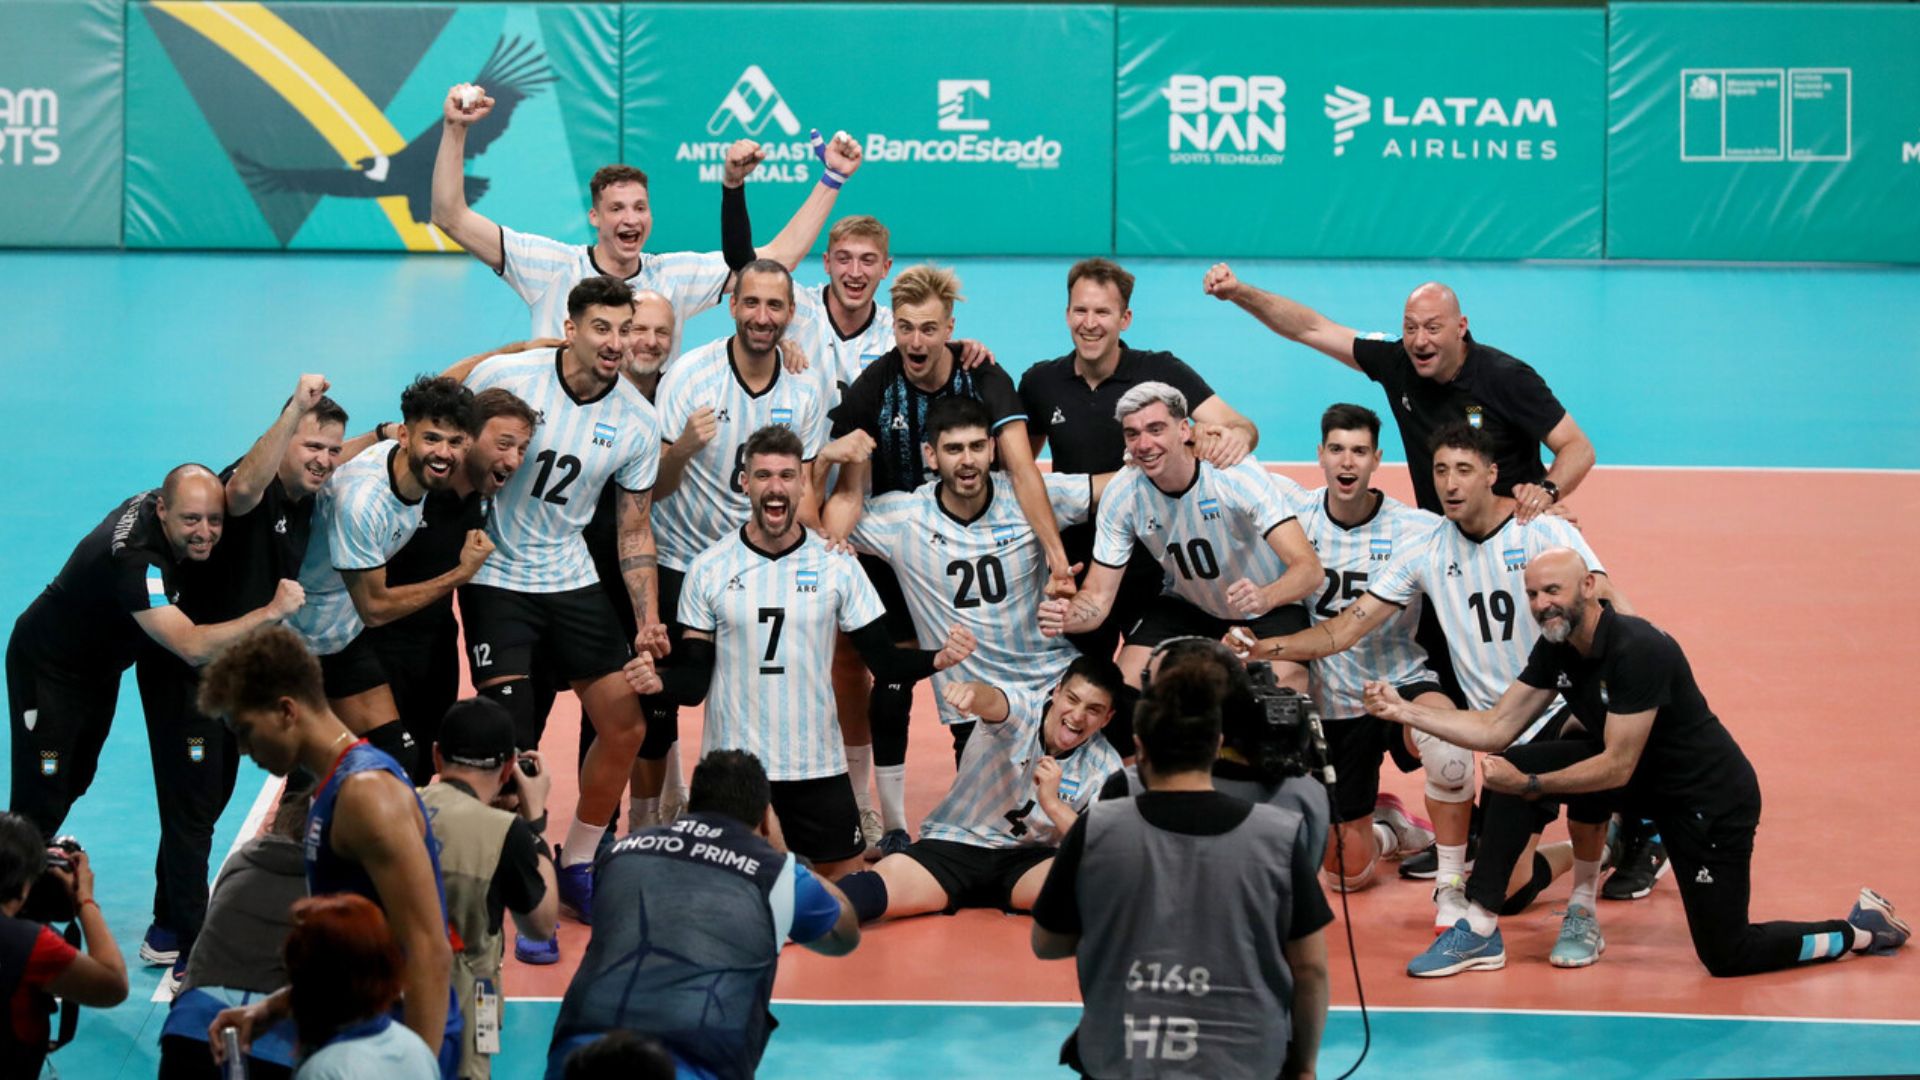 Argentina Aims for Gold in Male's Volleyball After Beating Cuba in Semifinals